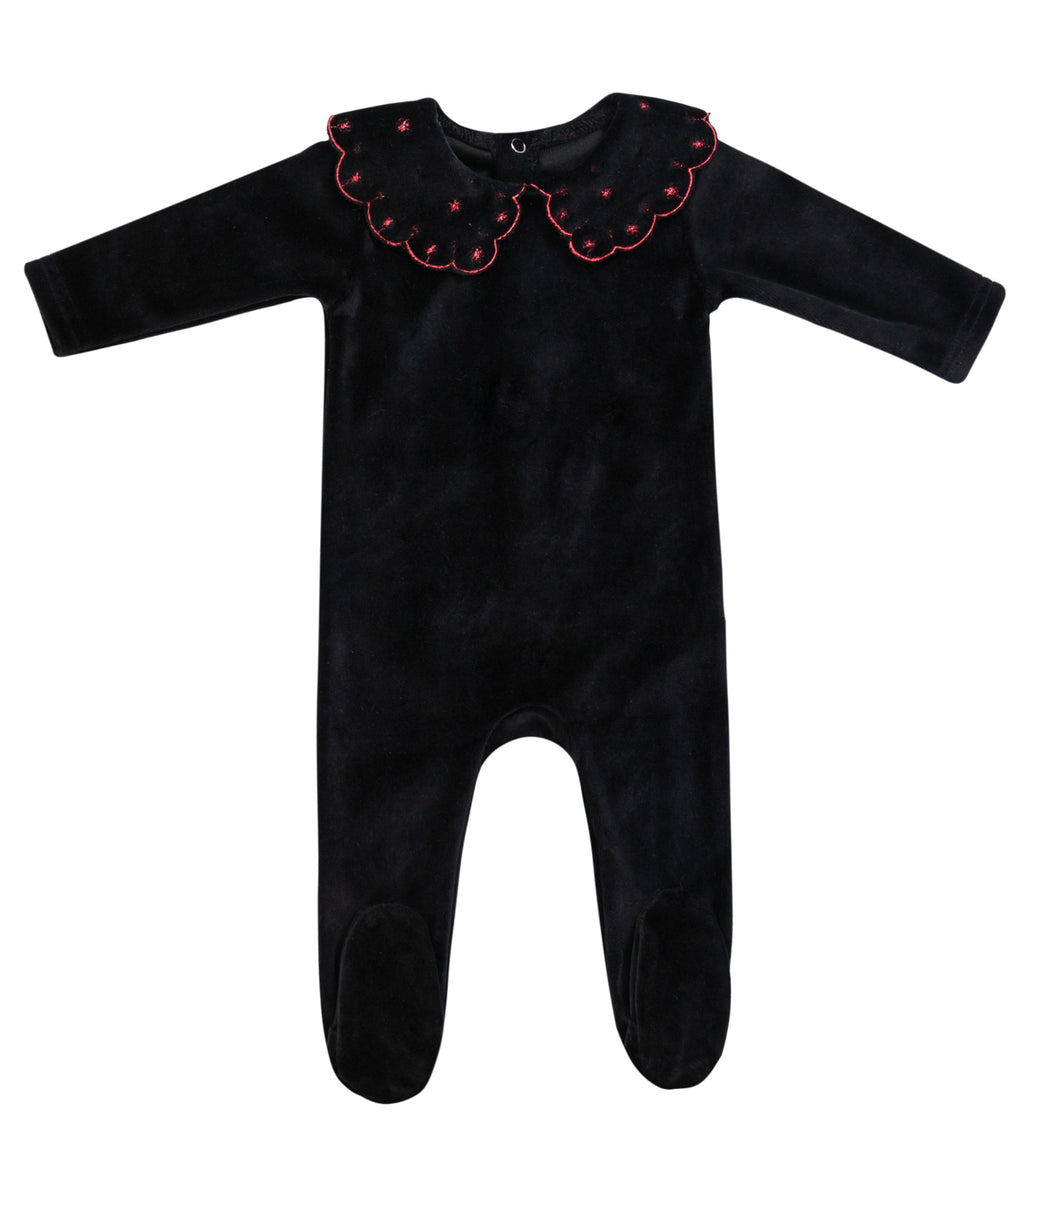 Cadeau Baby 6 Months Black Embroiled Round Collar Footie by Cadeau Baby